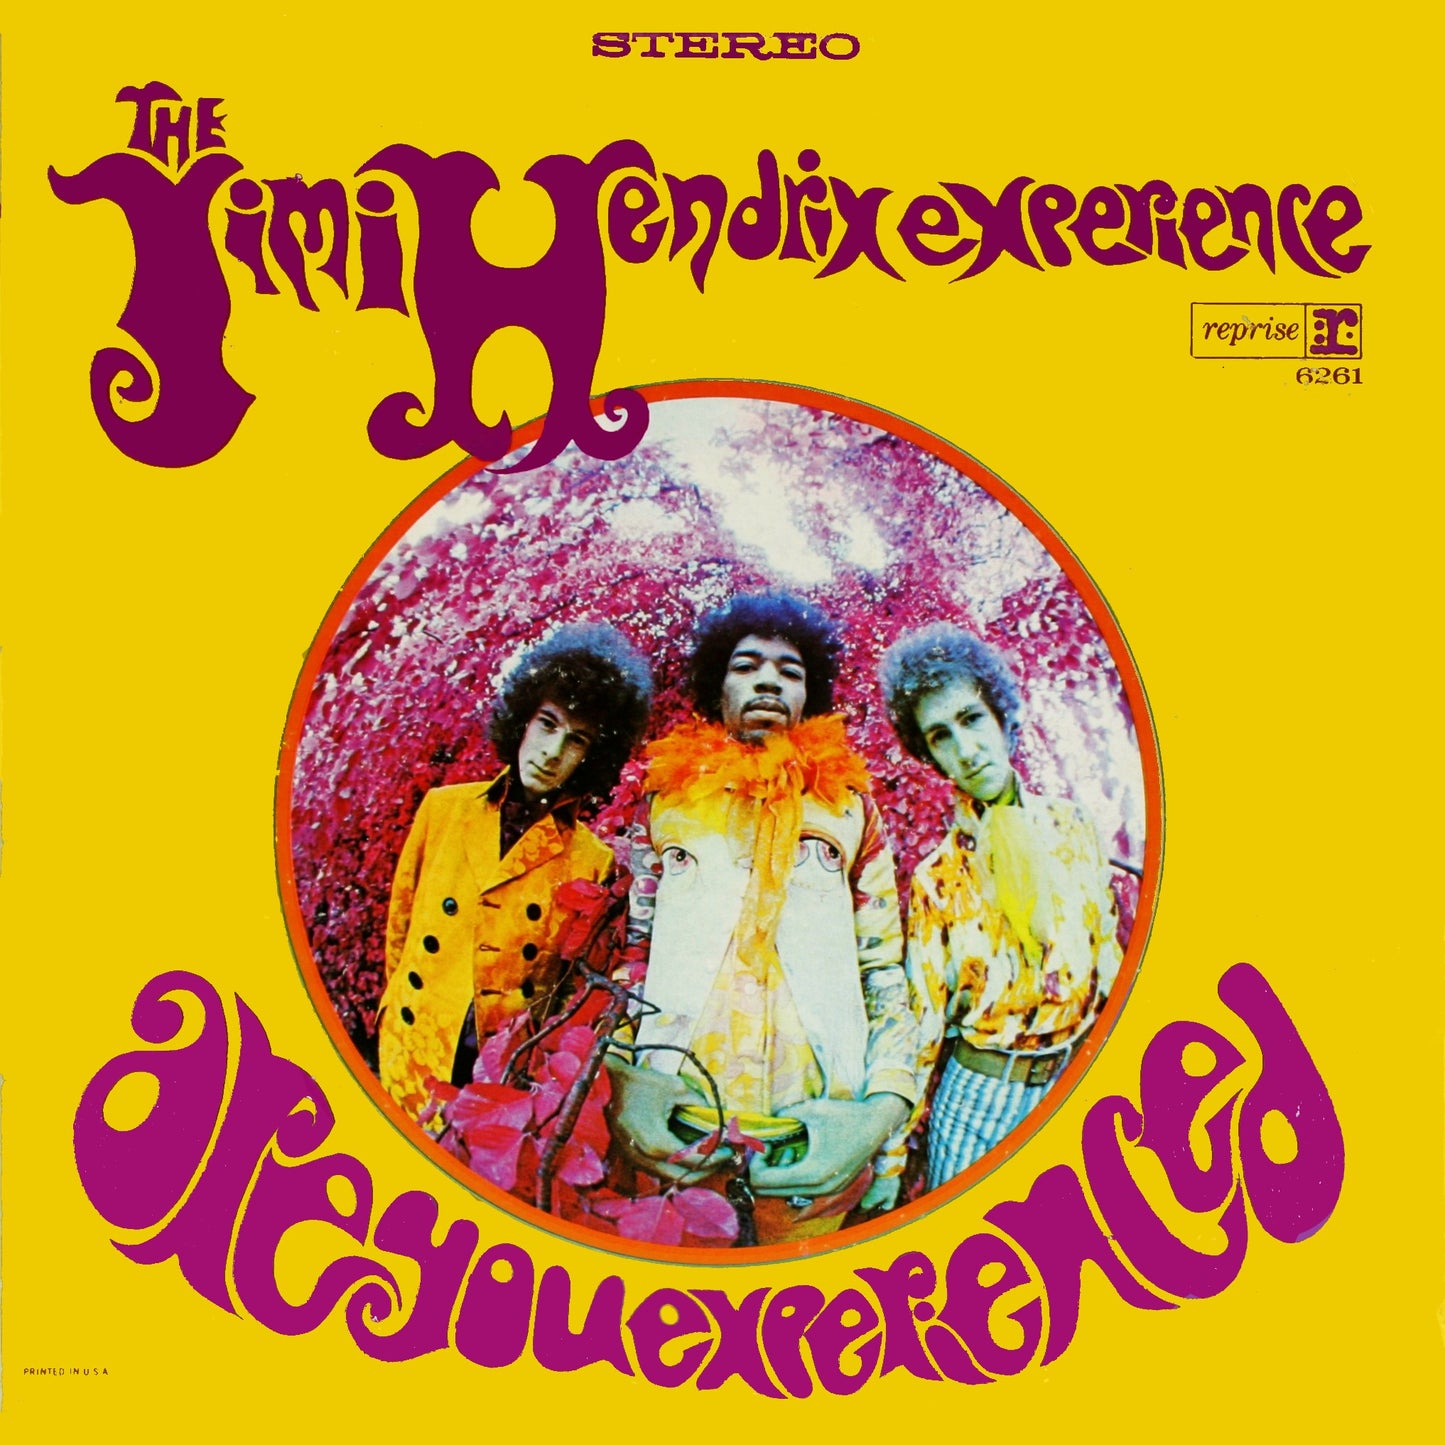 Jimi Hendrix Experience, "Are You Experienced?" (180 Gram)